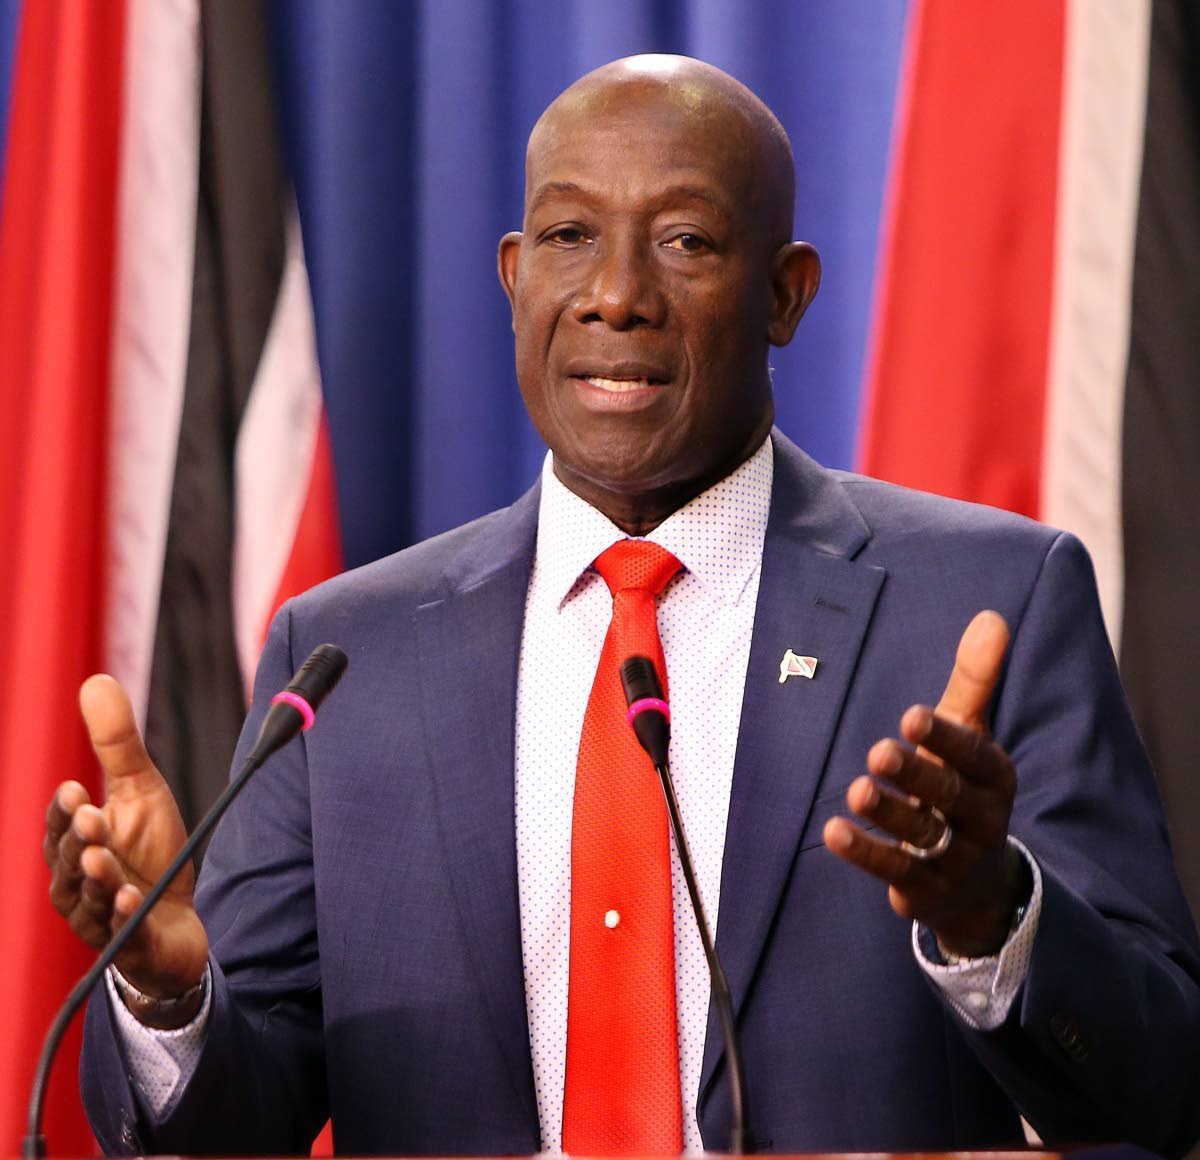 What will Dr Rowley say?